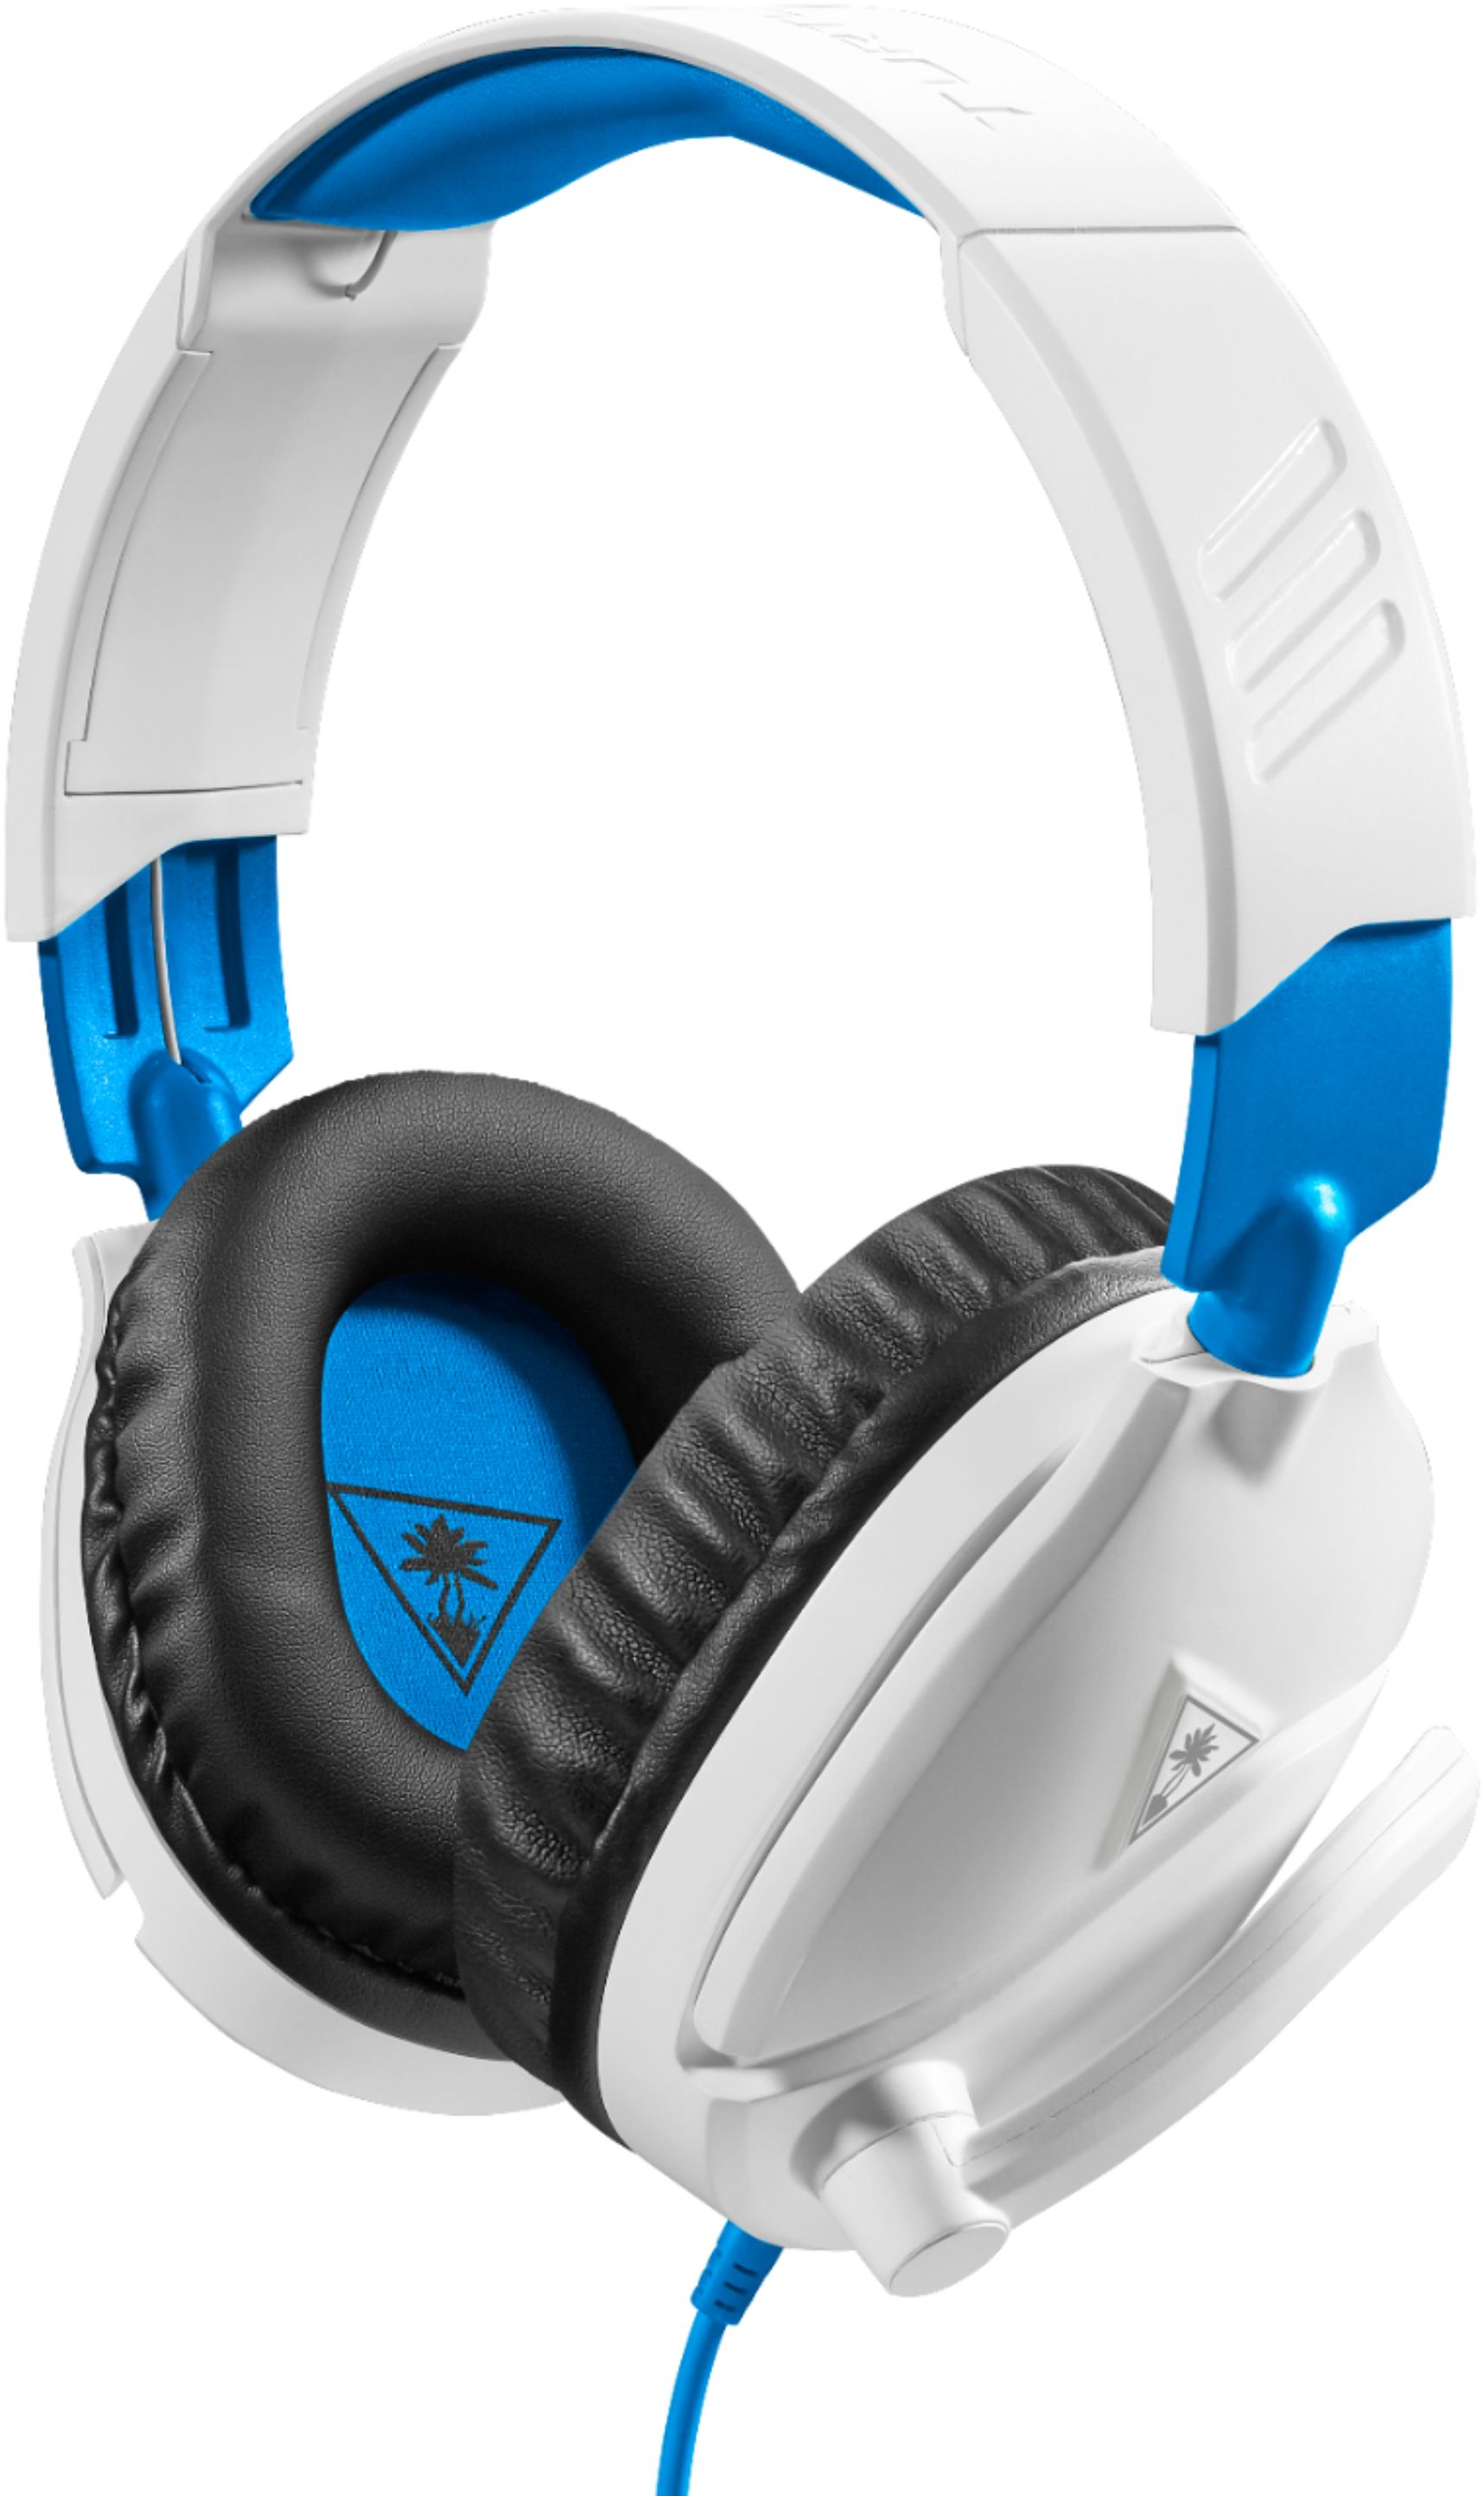 for White/Blue PS4 70 Gaming Stereo Wired & Pro, Buy: Turtle Headset TBS-3455-01 PS4 Recon PS5 Beach Best